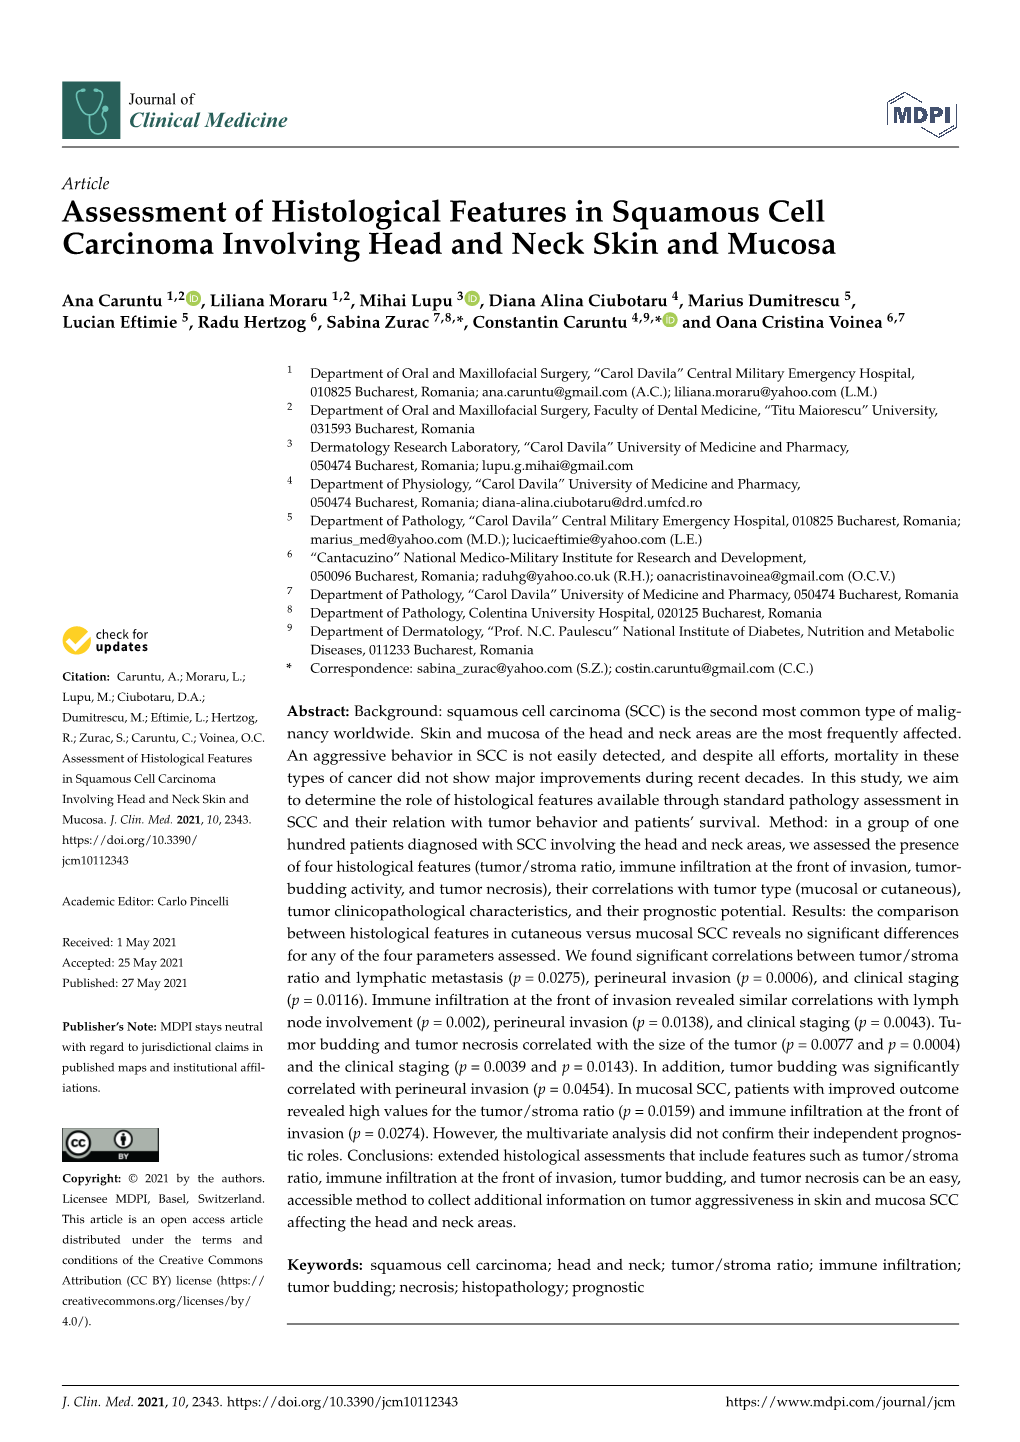 Assessment of Histological Features in Squamous Cell Carcinoma Involving Head and Neck Skin and Mucosa